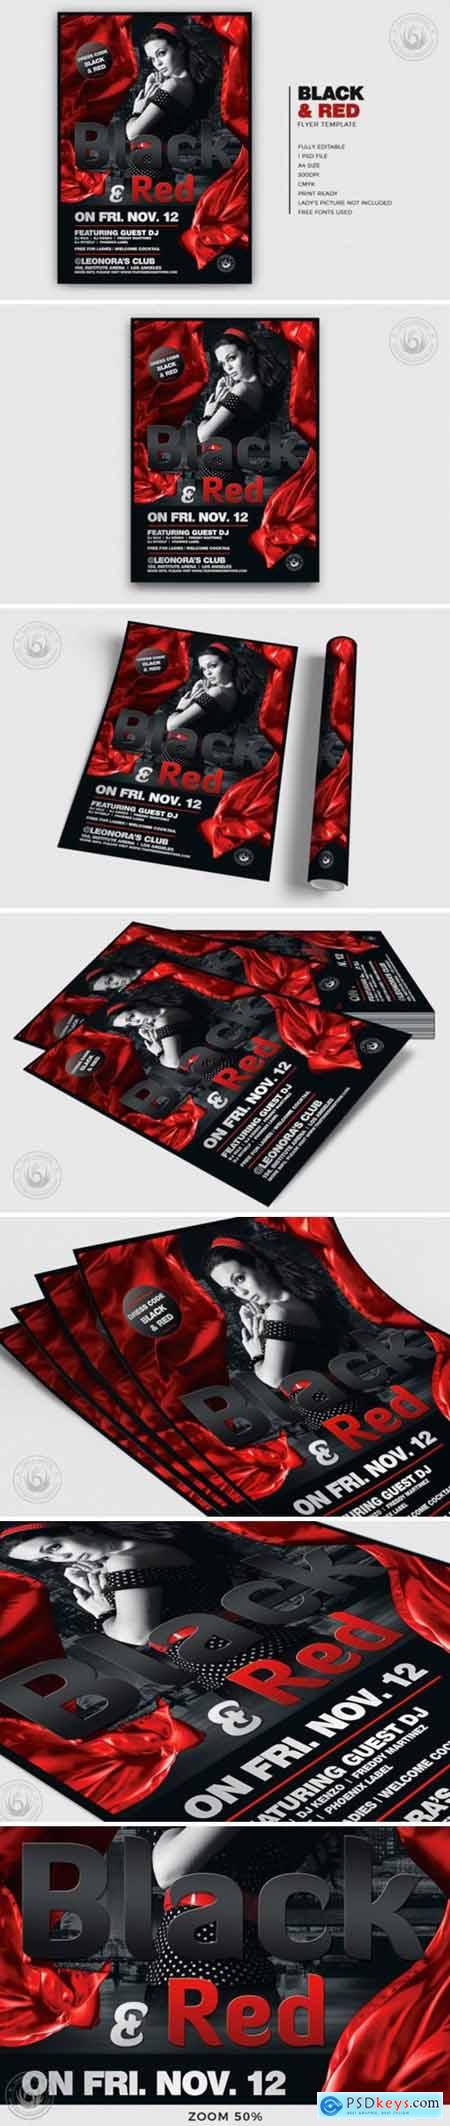 Black and Red Flyer Template V2 1511860